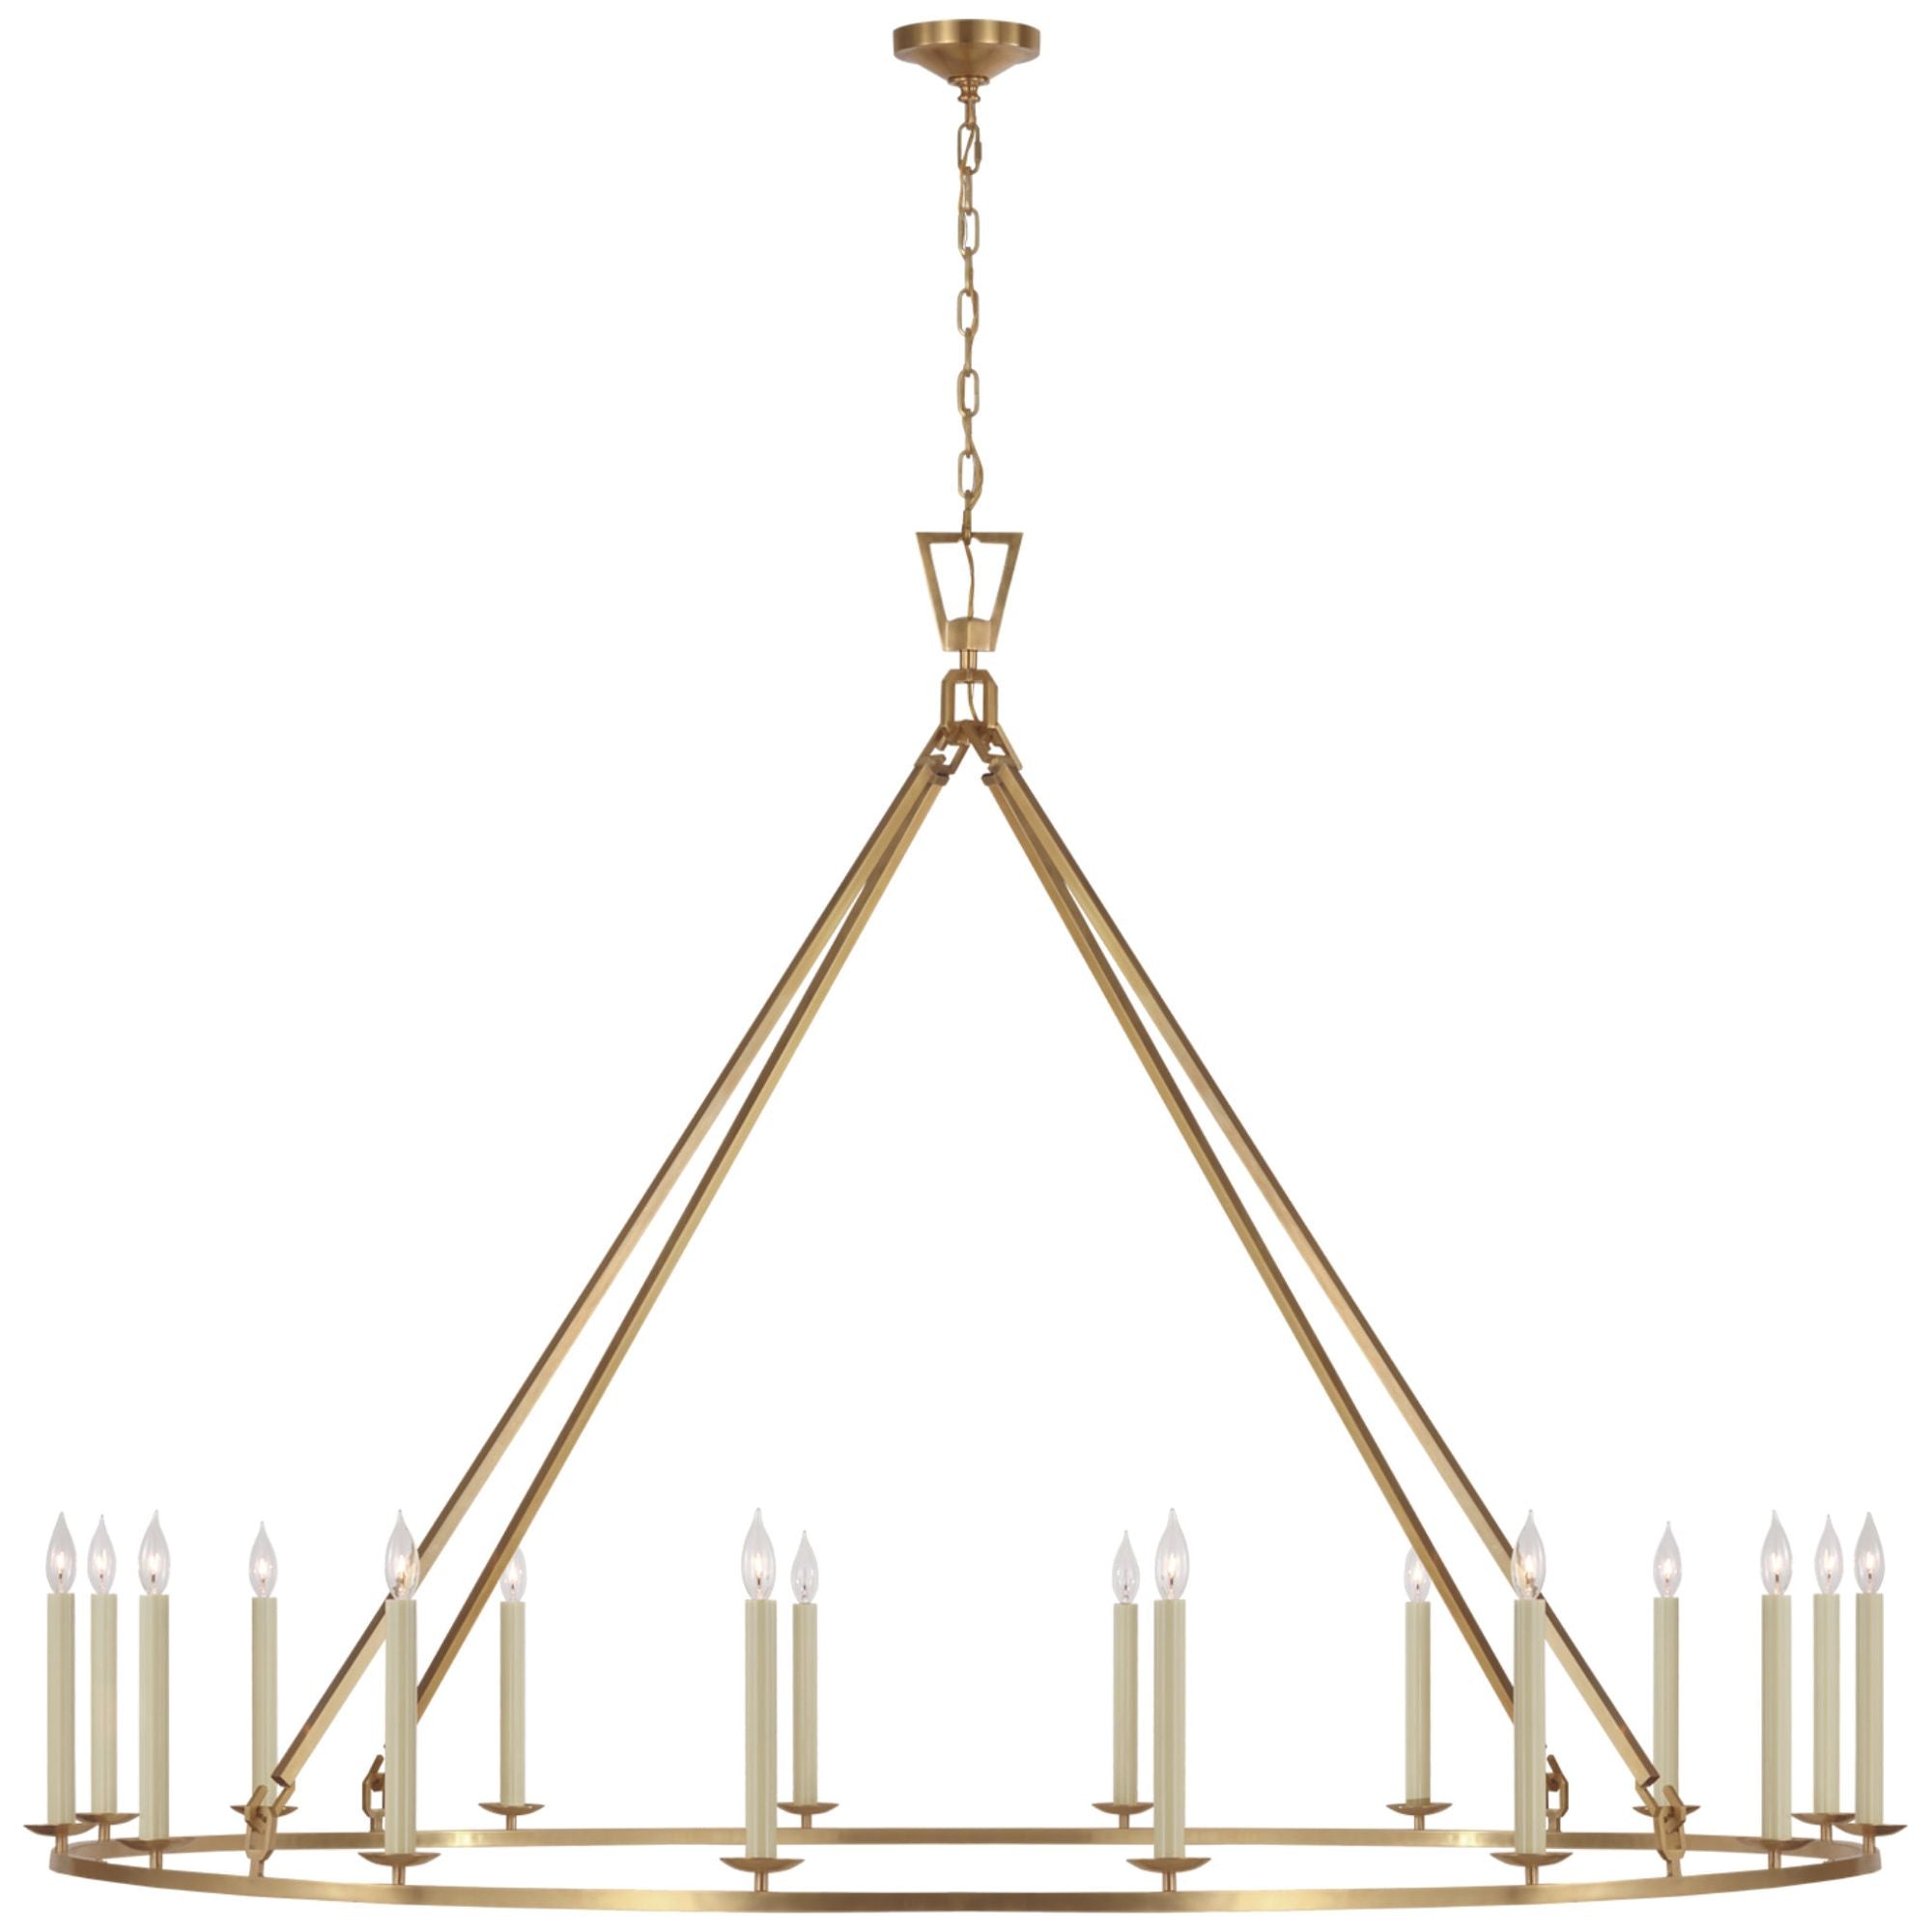 Chapman & Myers Darlana Grande Single Ring Chandelier in Antique-Burnished Brass